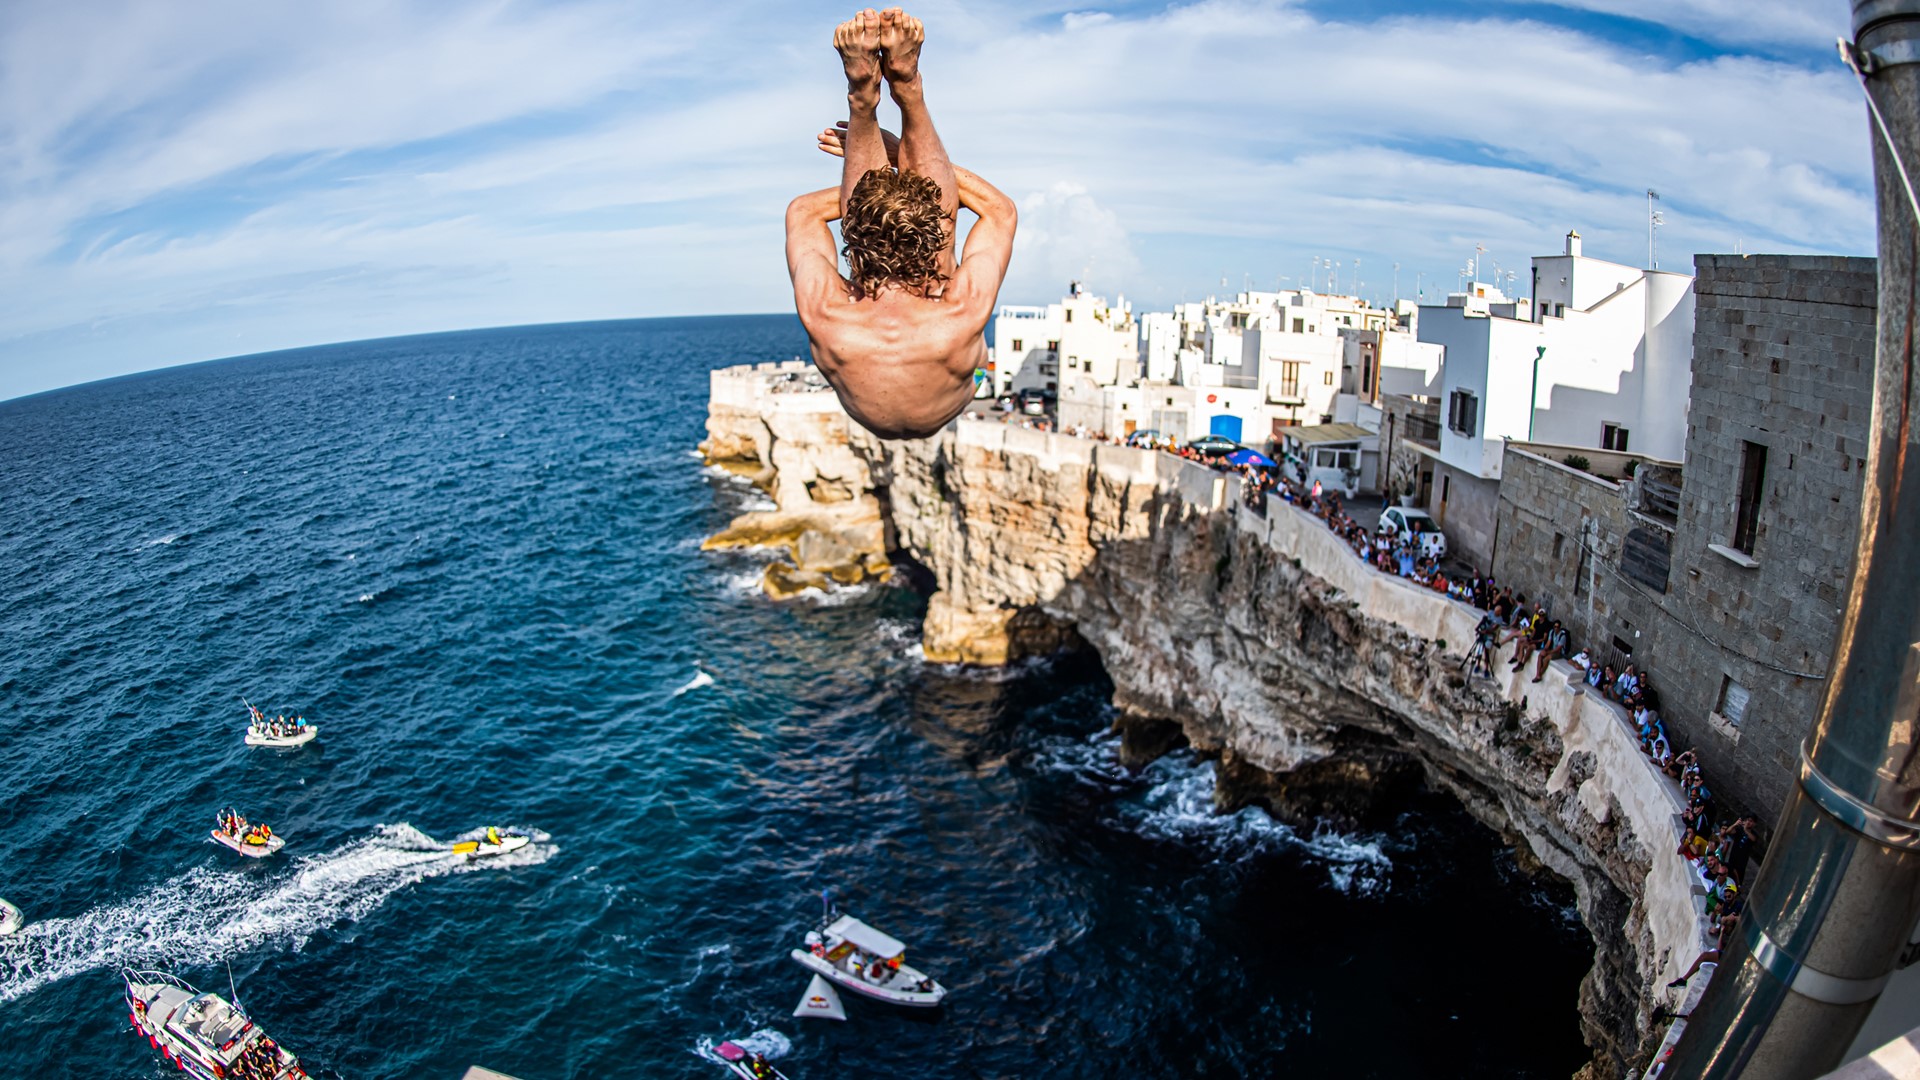 A BREATHTAKING DIVE INTO A SEA OF EXCITEMENT. FPT INDUSTRIAL IS OFFICIAL TECHNICAL PARTNER FOR THE RED BULL CLIFF DIVING